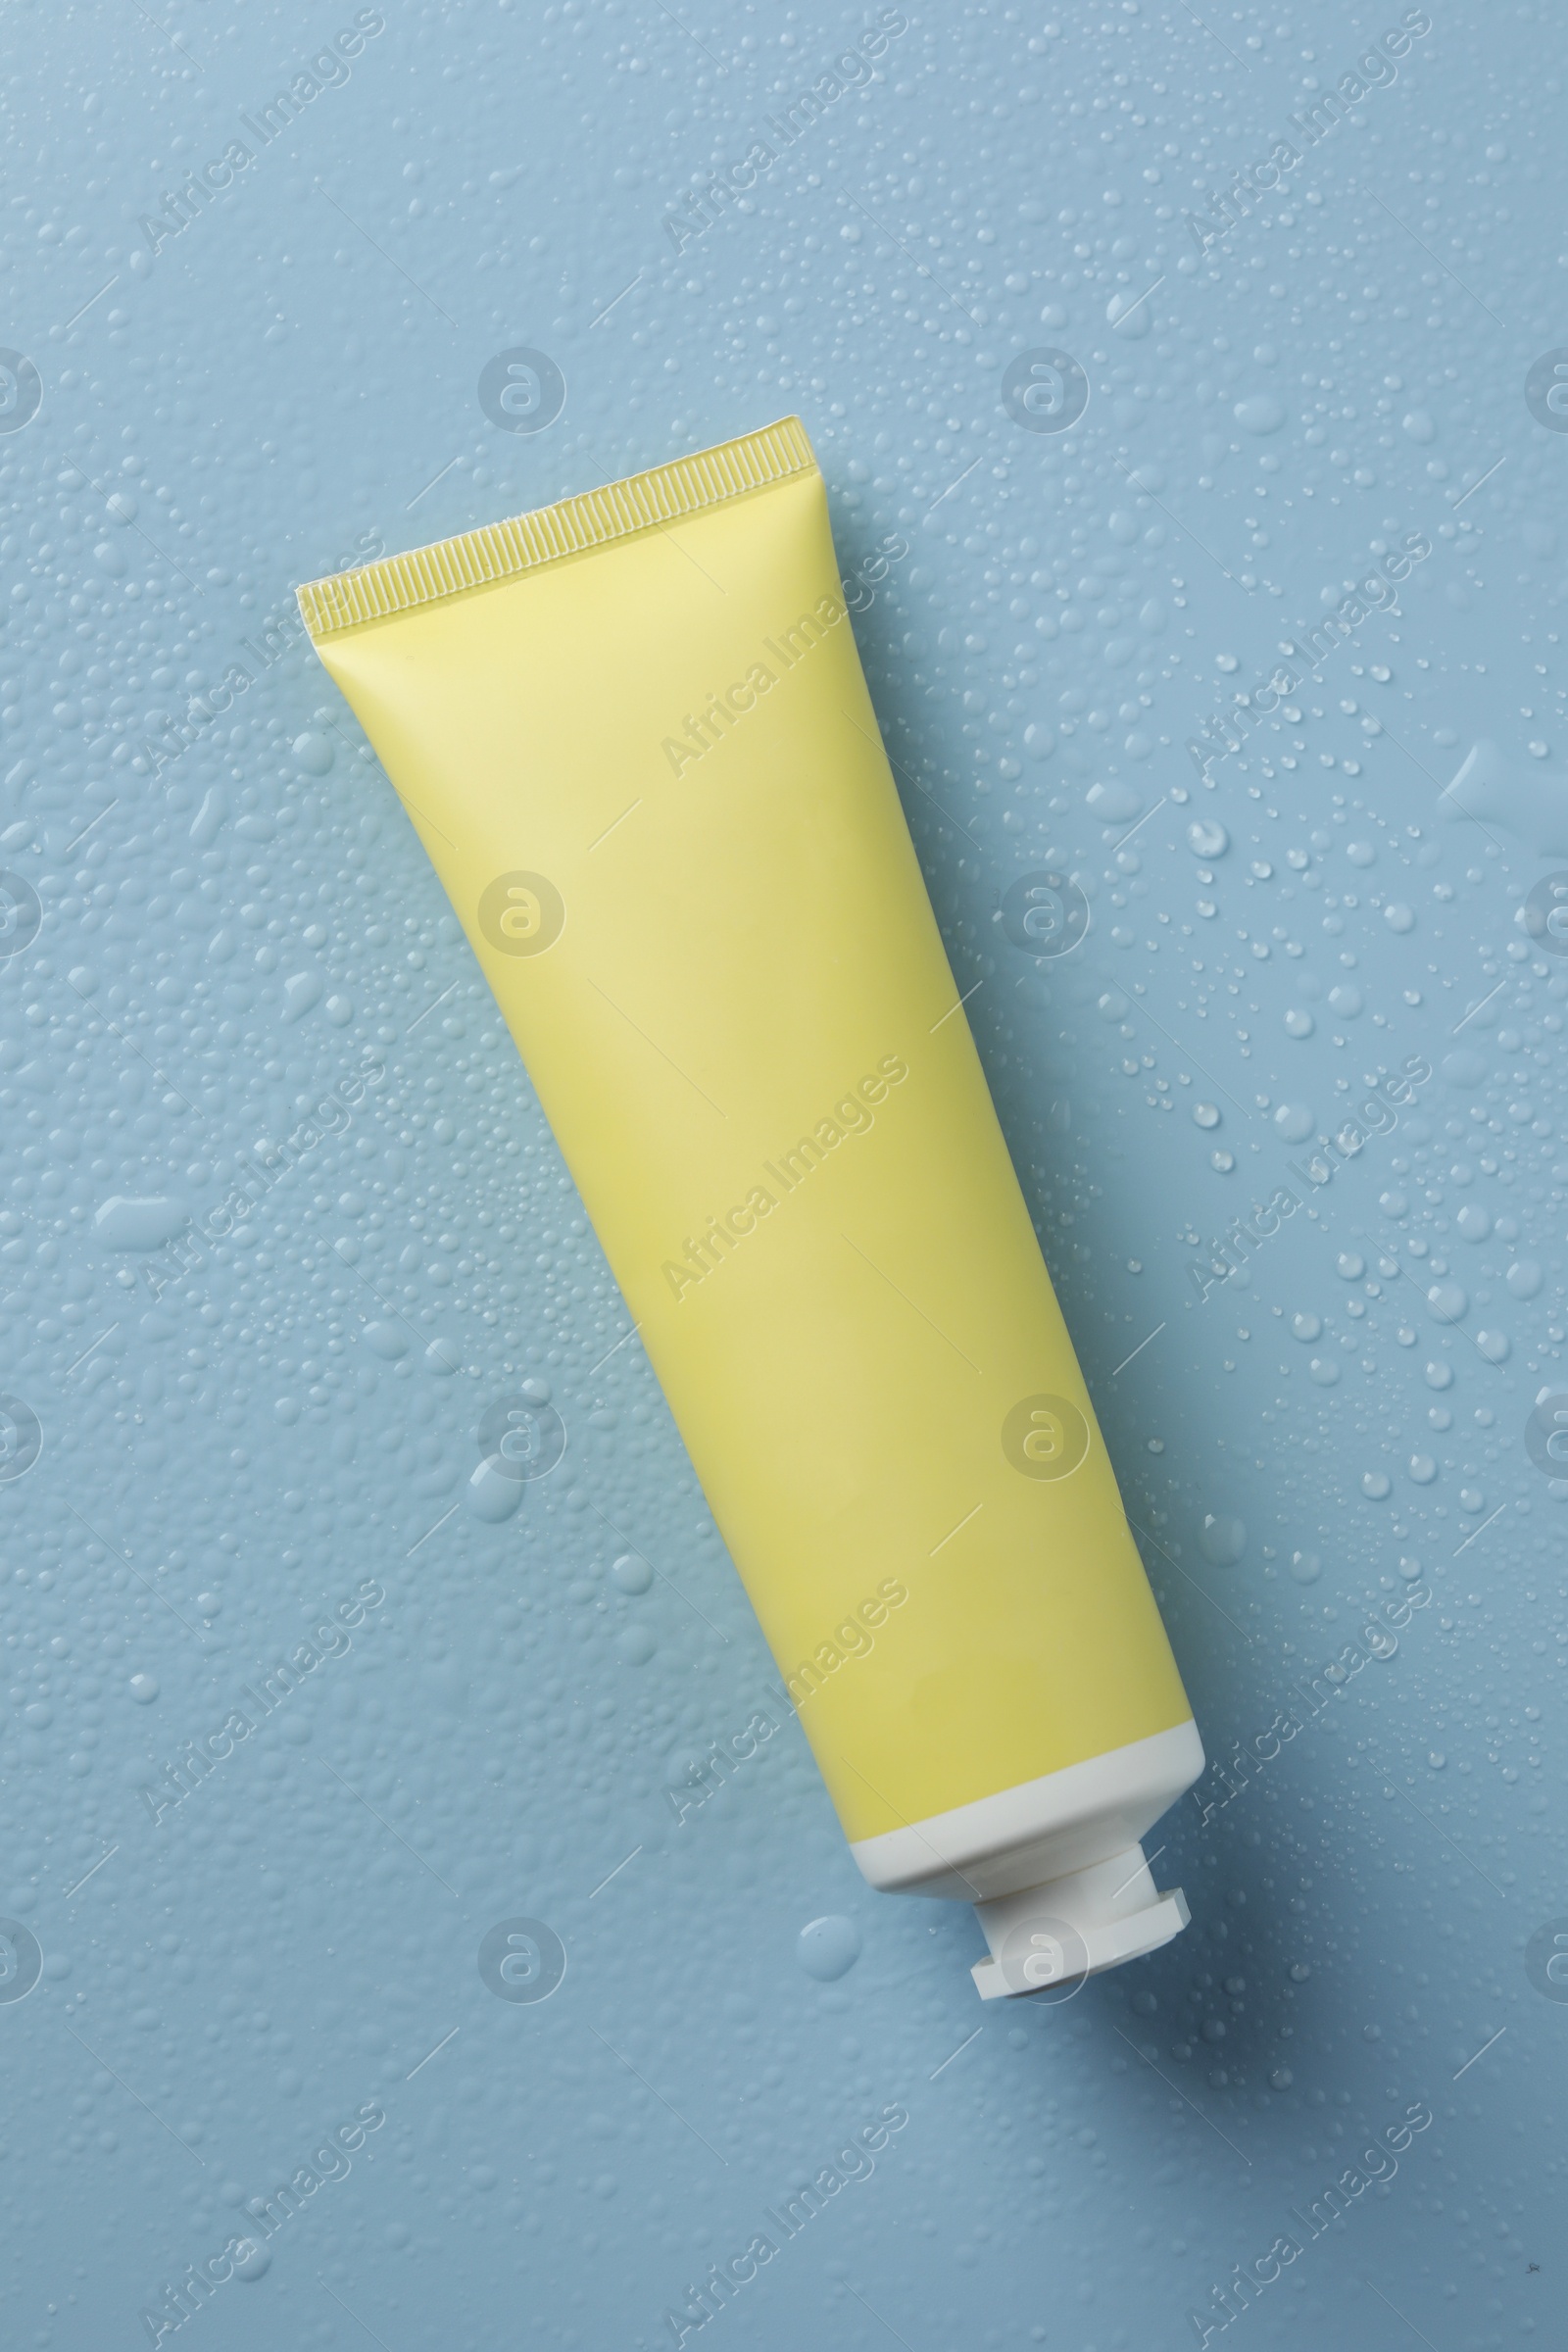 Photo of Moisturizing cream in tube on light blue background with water drops, top view